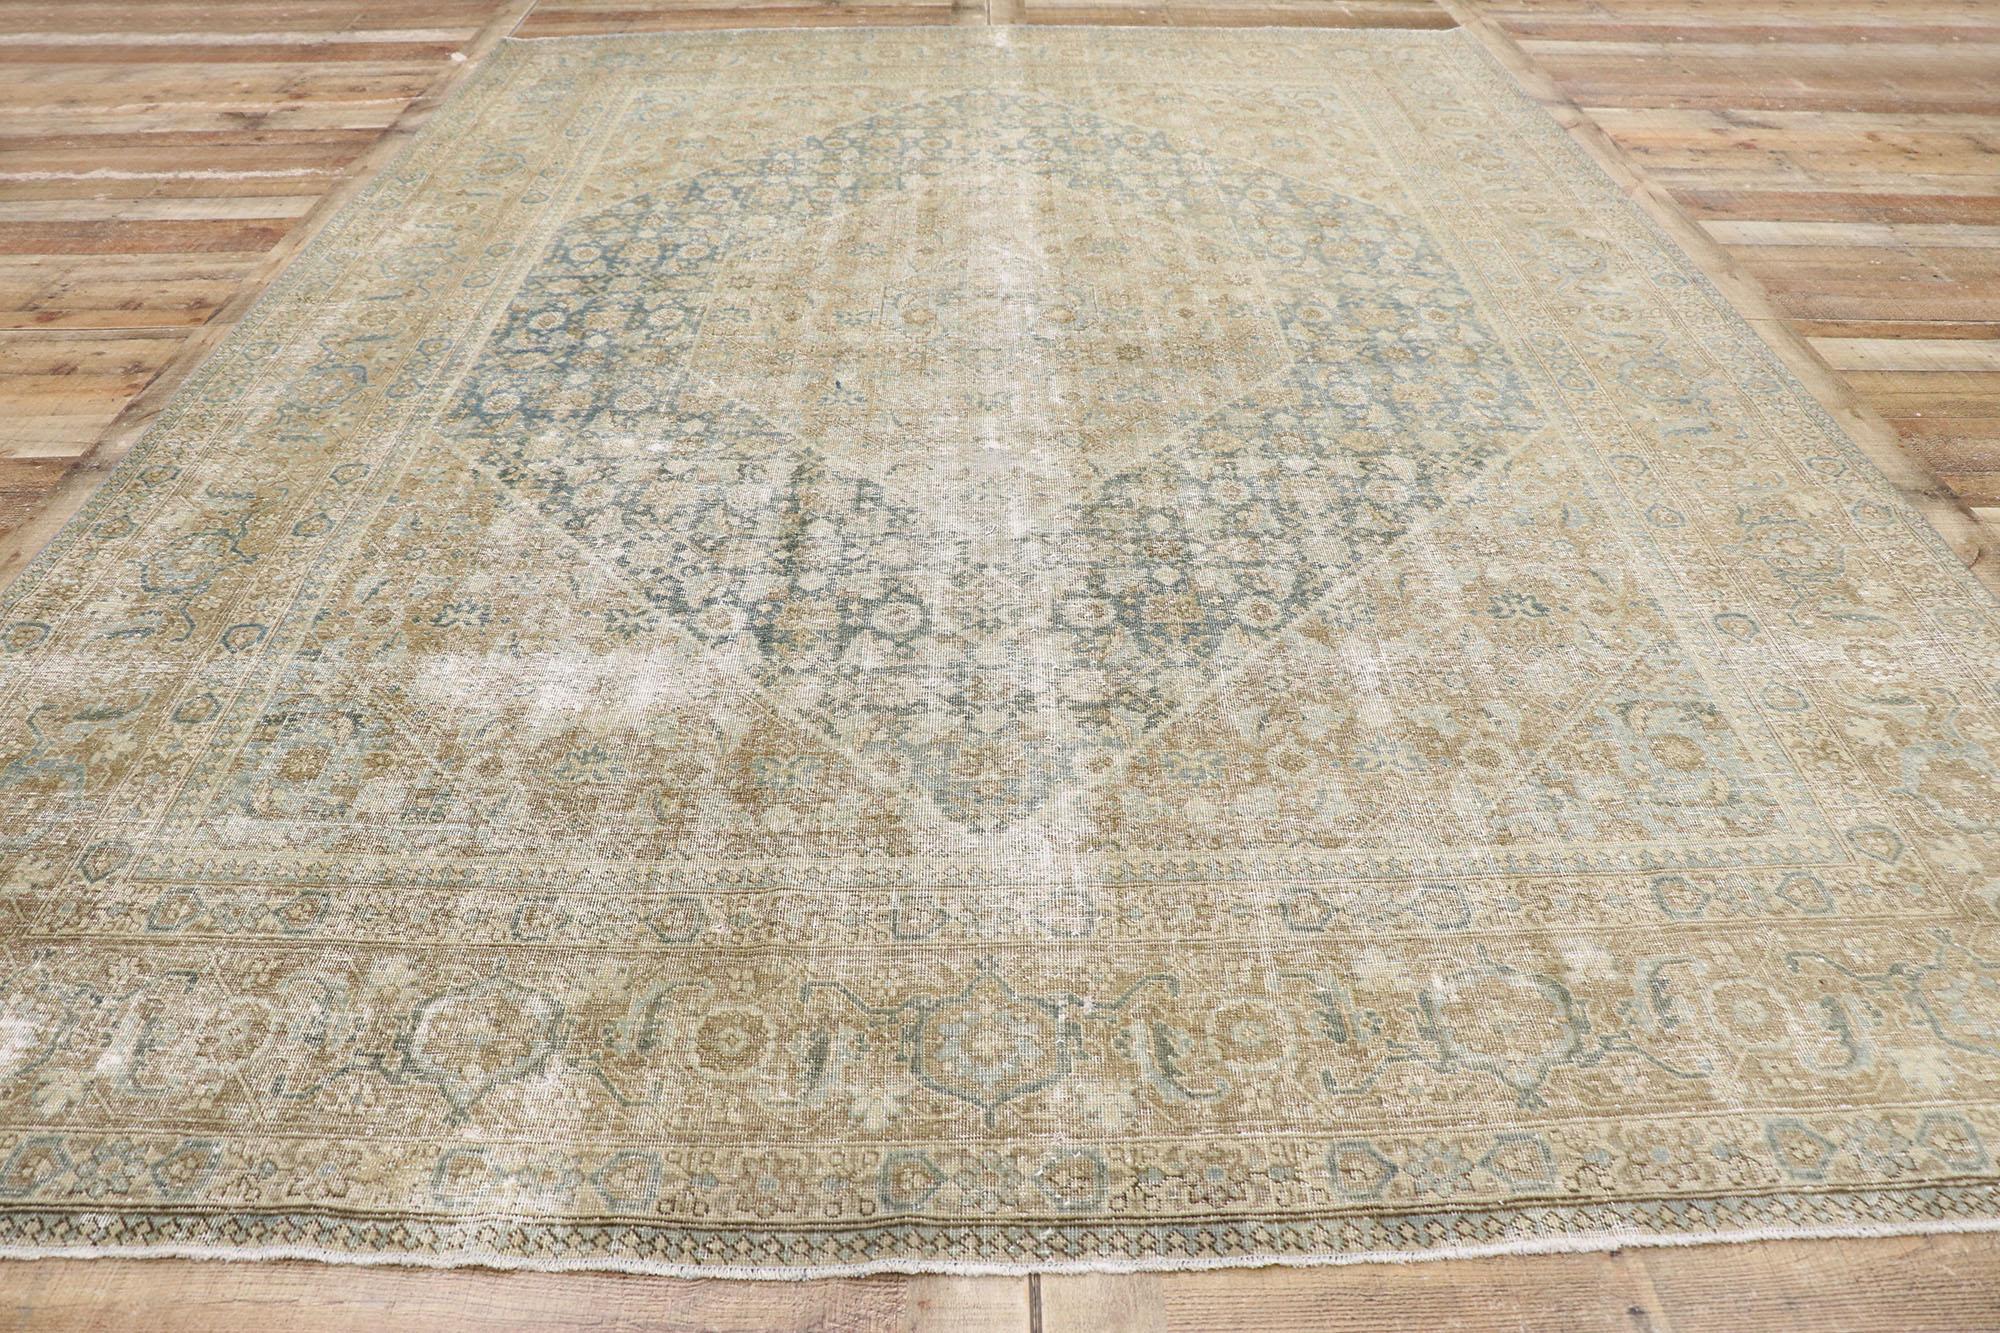 Distressed Antique Persian Mahi Tabriz Rug with Modern Rustic Style For Sale 1